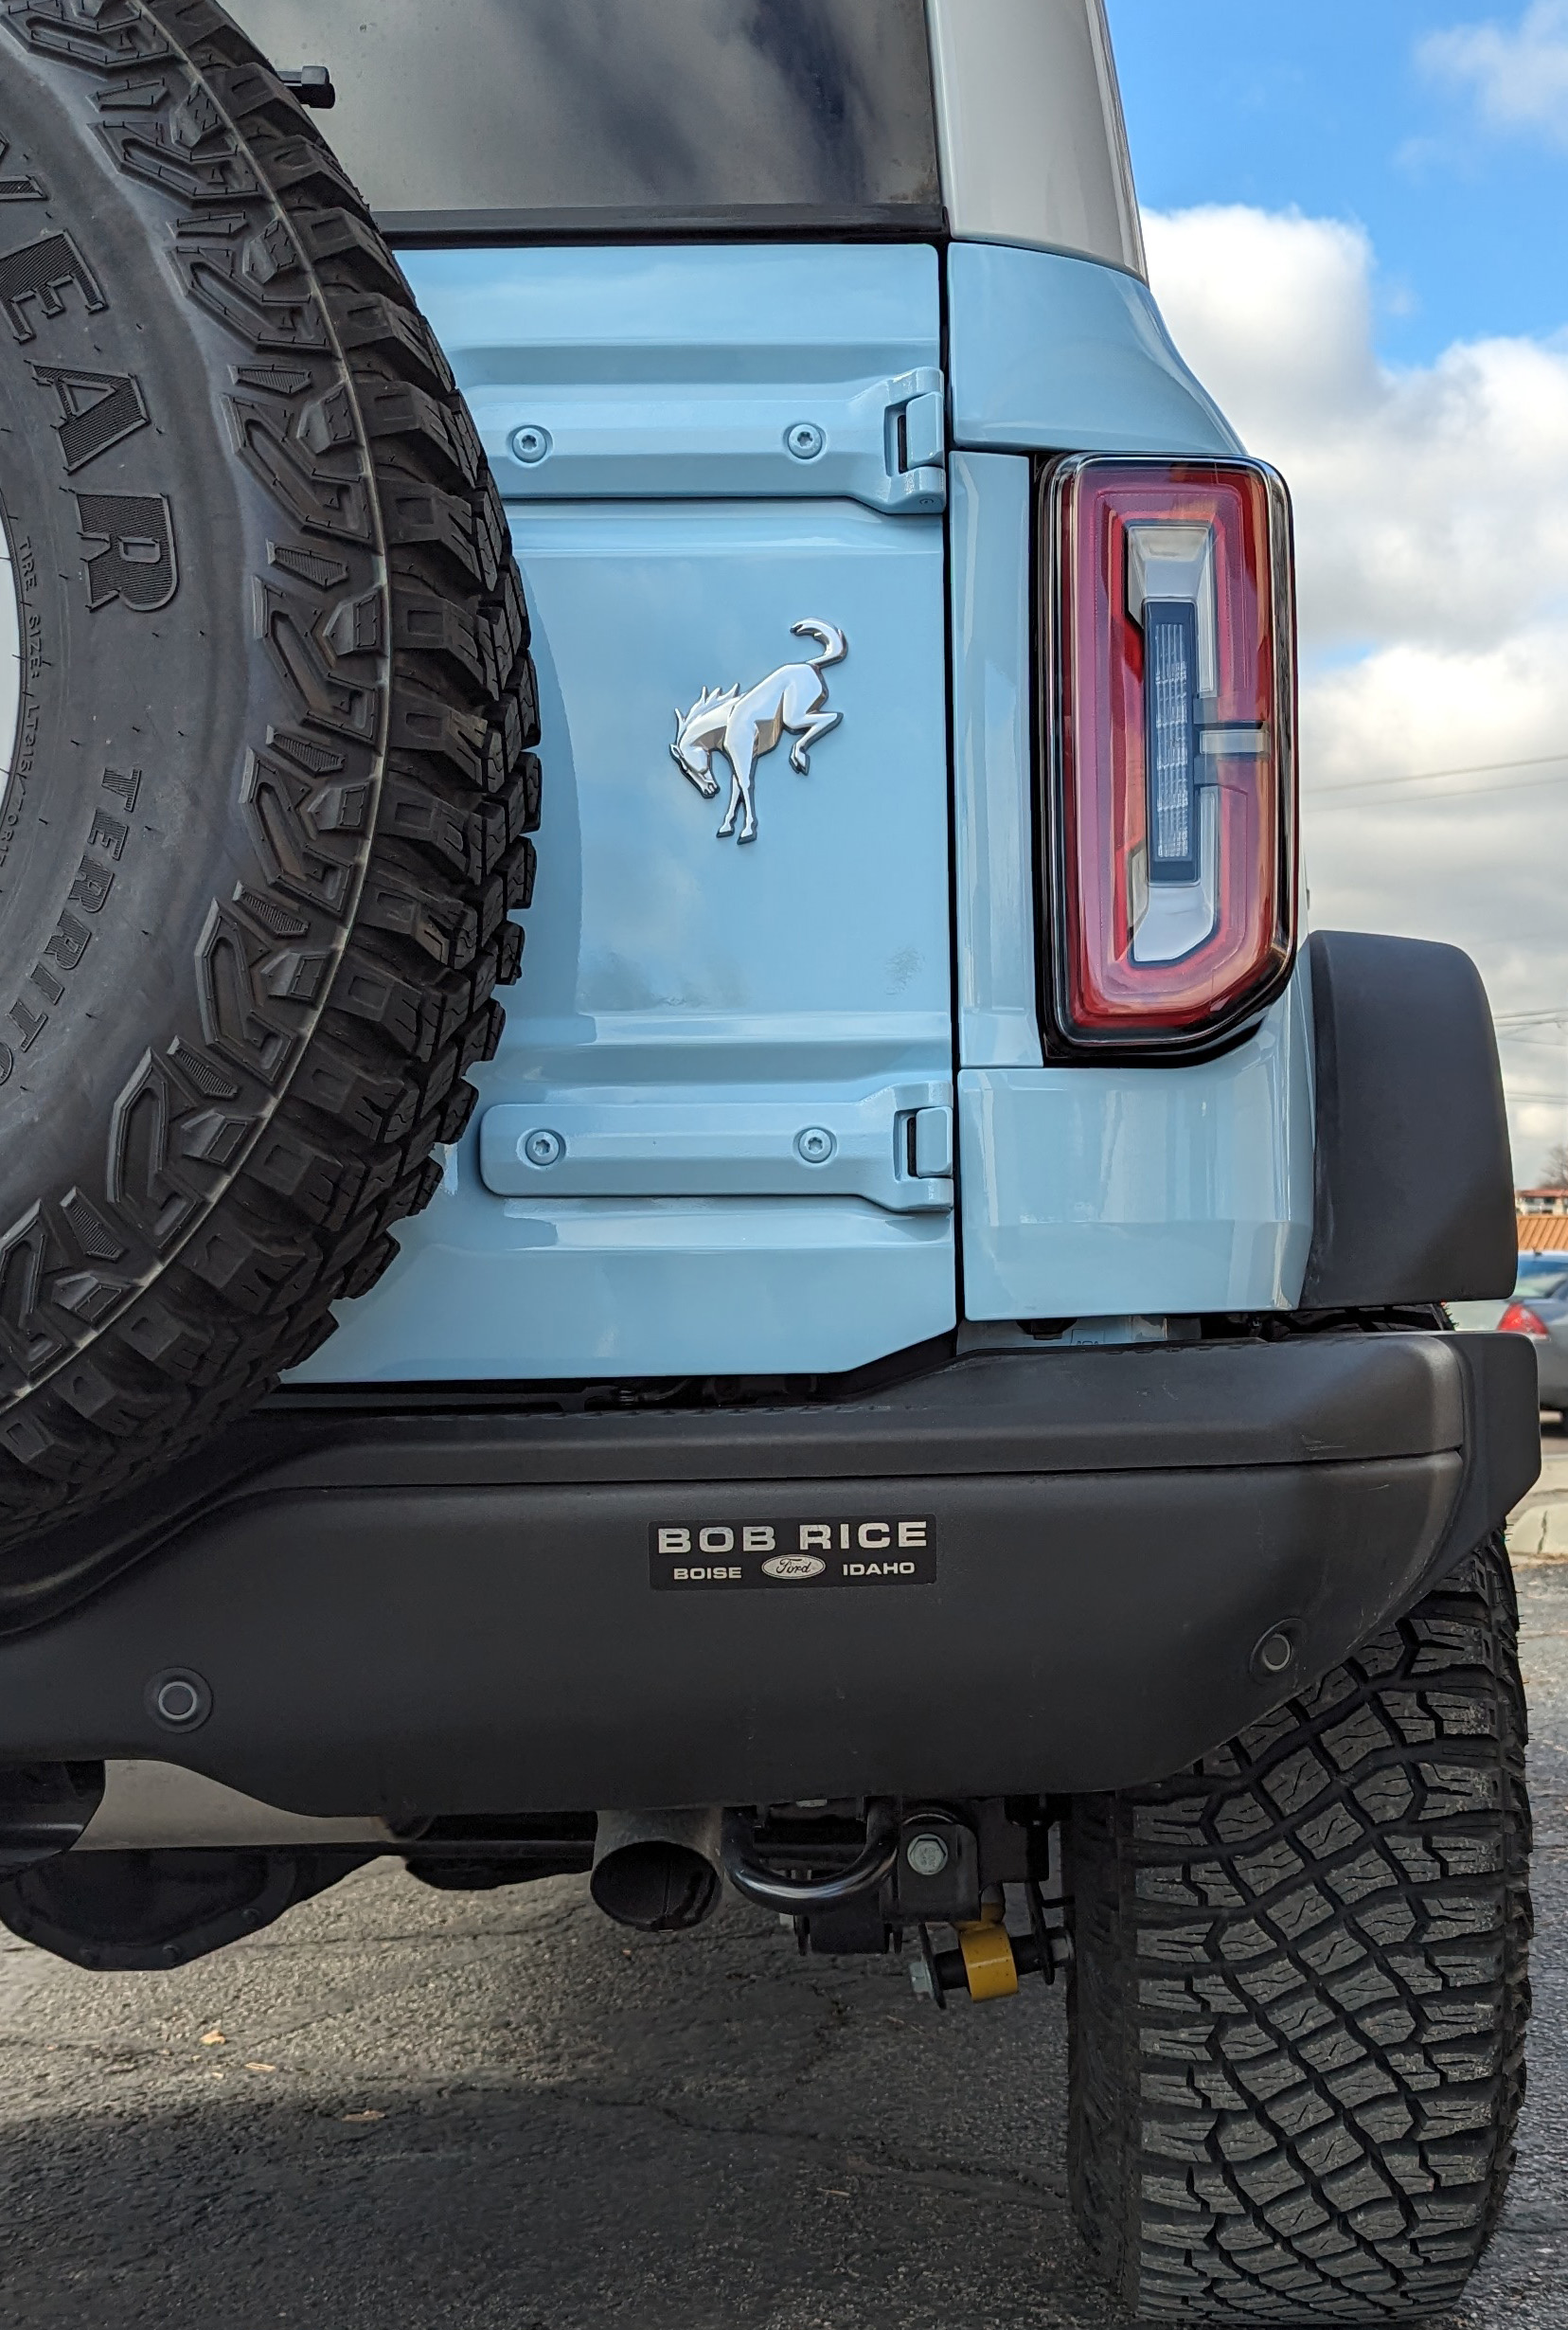 Ford Bronco Have you put Stickers on your Bronco? Let's see them Bob Rice easter egg close u